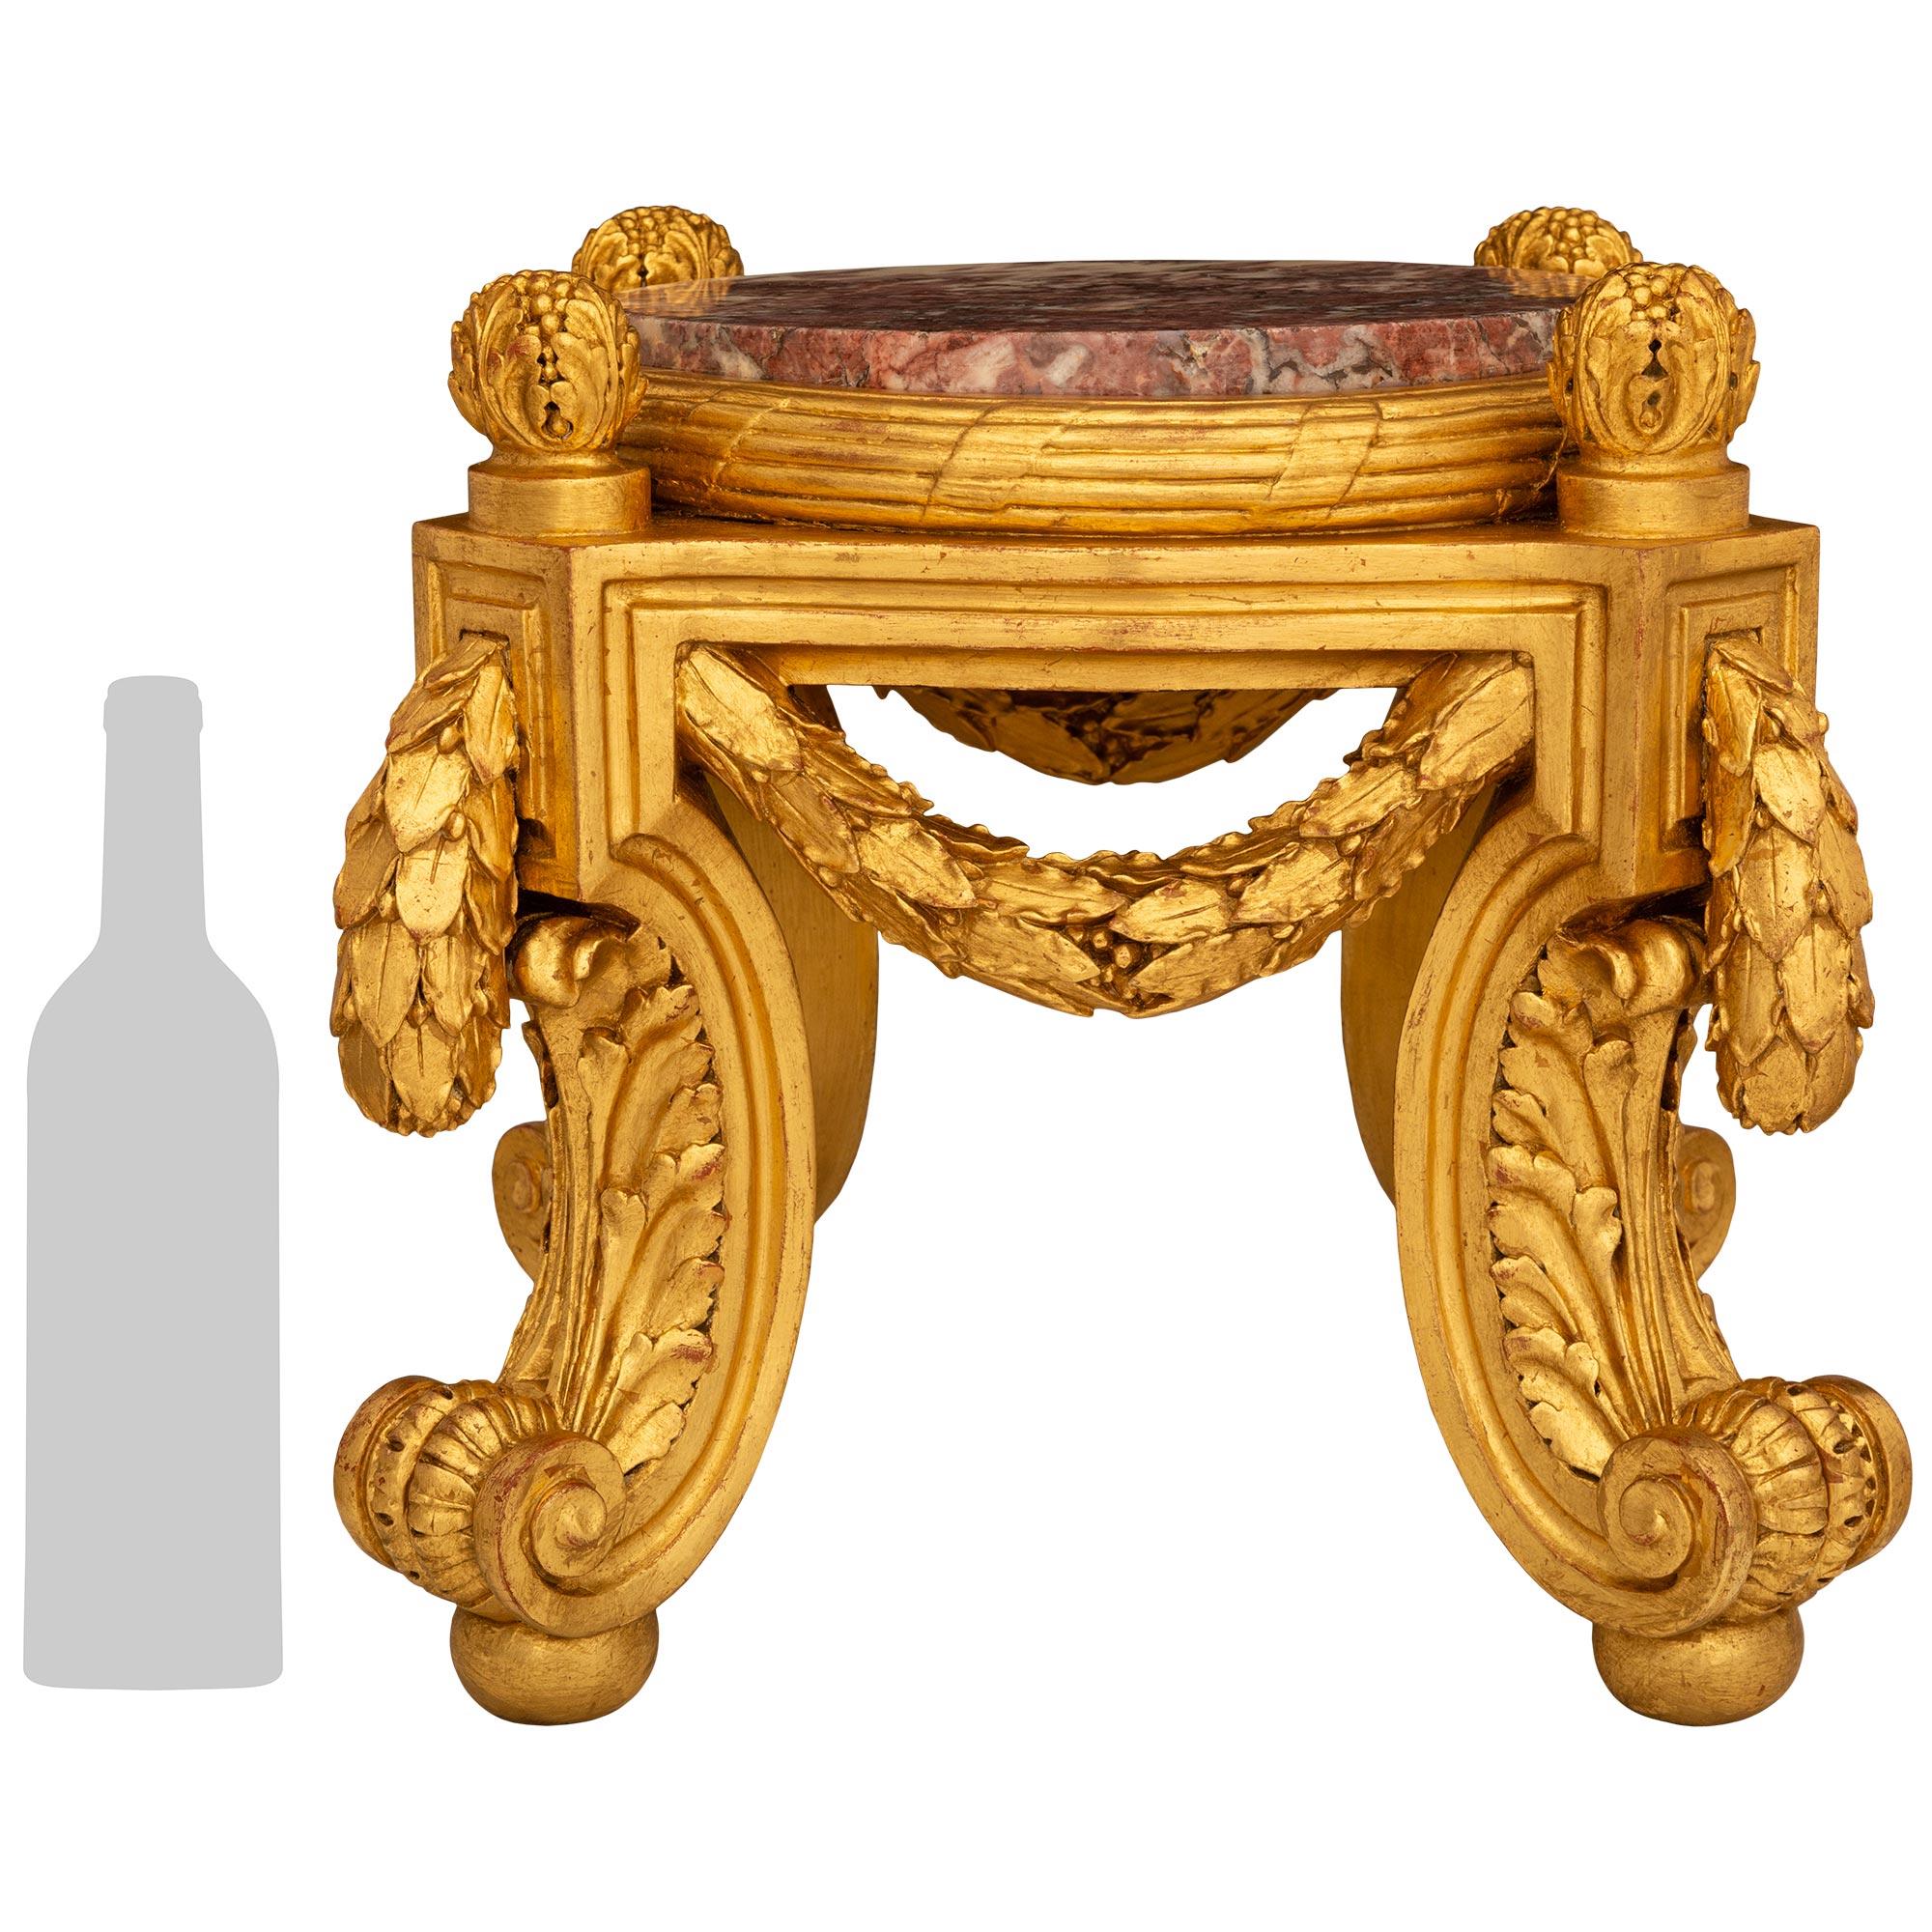 A most decorative and high quality French 19th century Belle Epoque period Louis XVI st. Giltwood and Breccia Violette marble pedestal. This unique pedestal is raised by four 'C' scrolled cabriole legs decorated with foliate designs and supported on